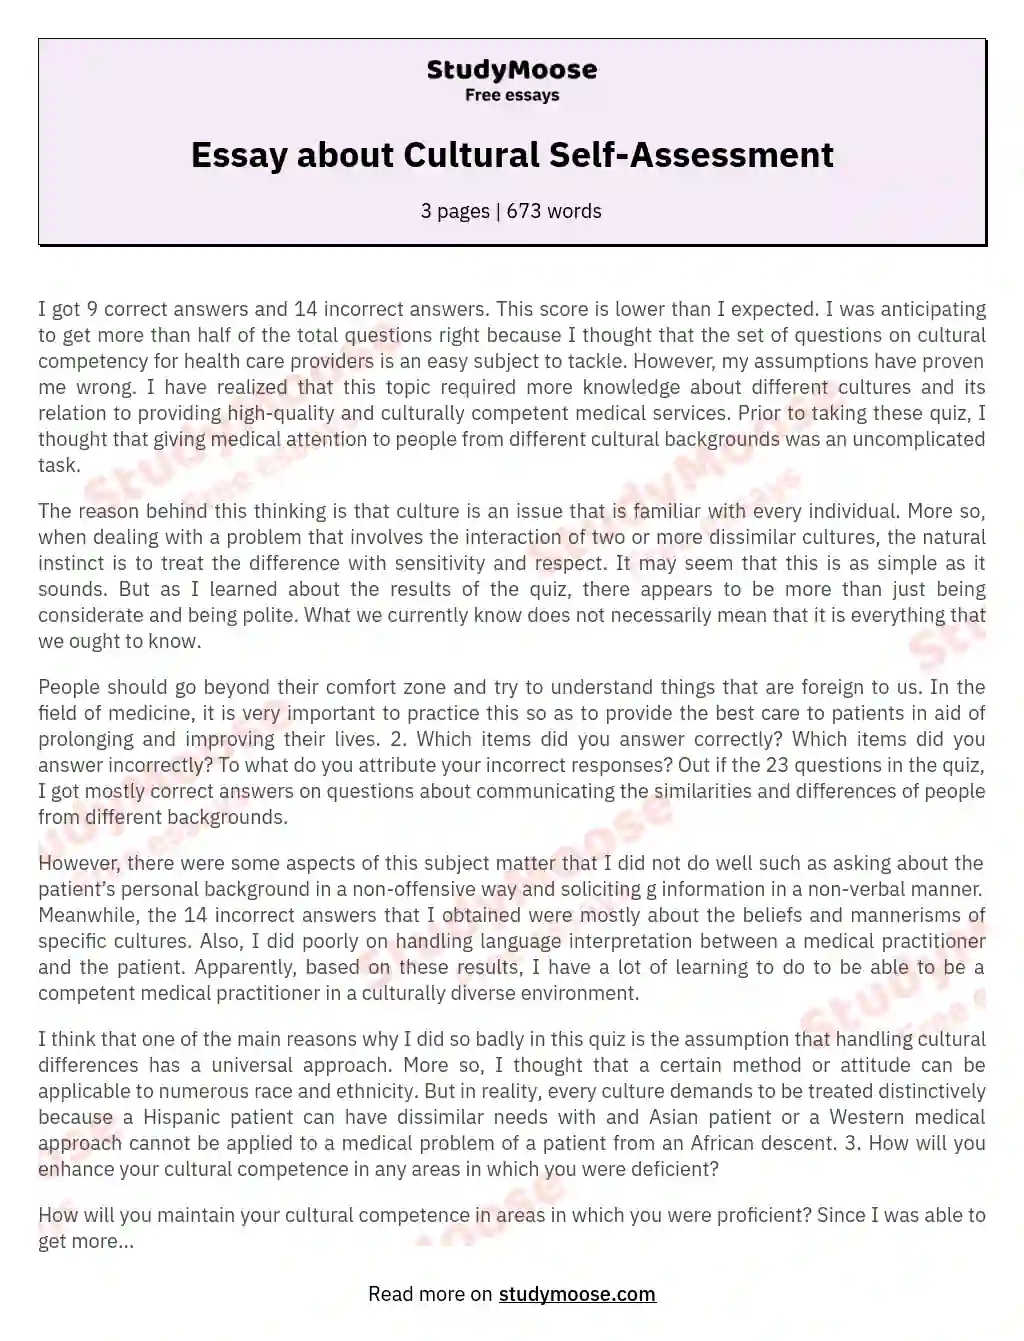 Essay about Cultural Self-Assessment